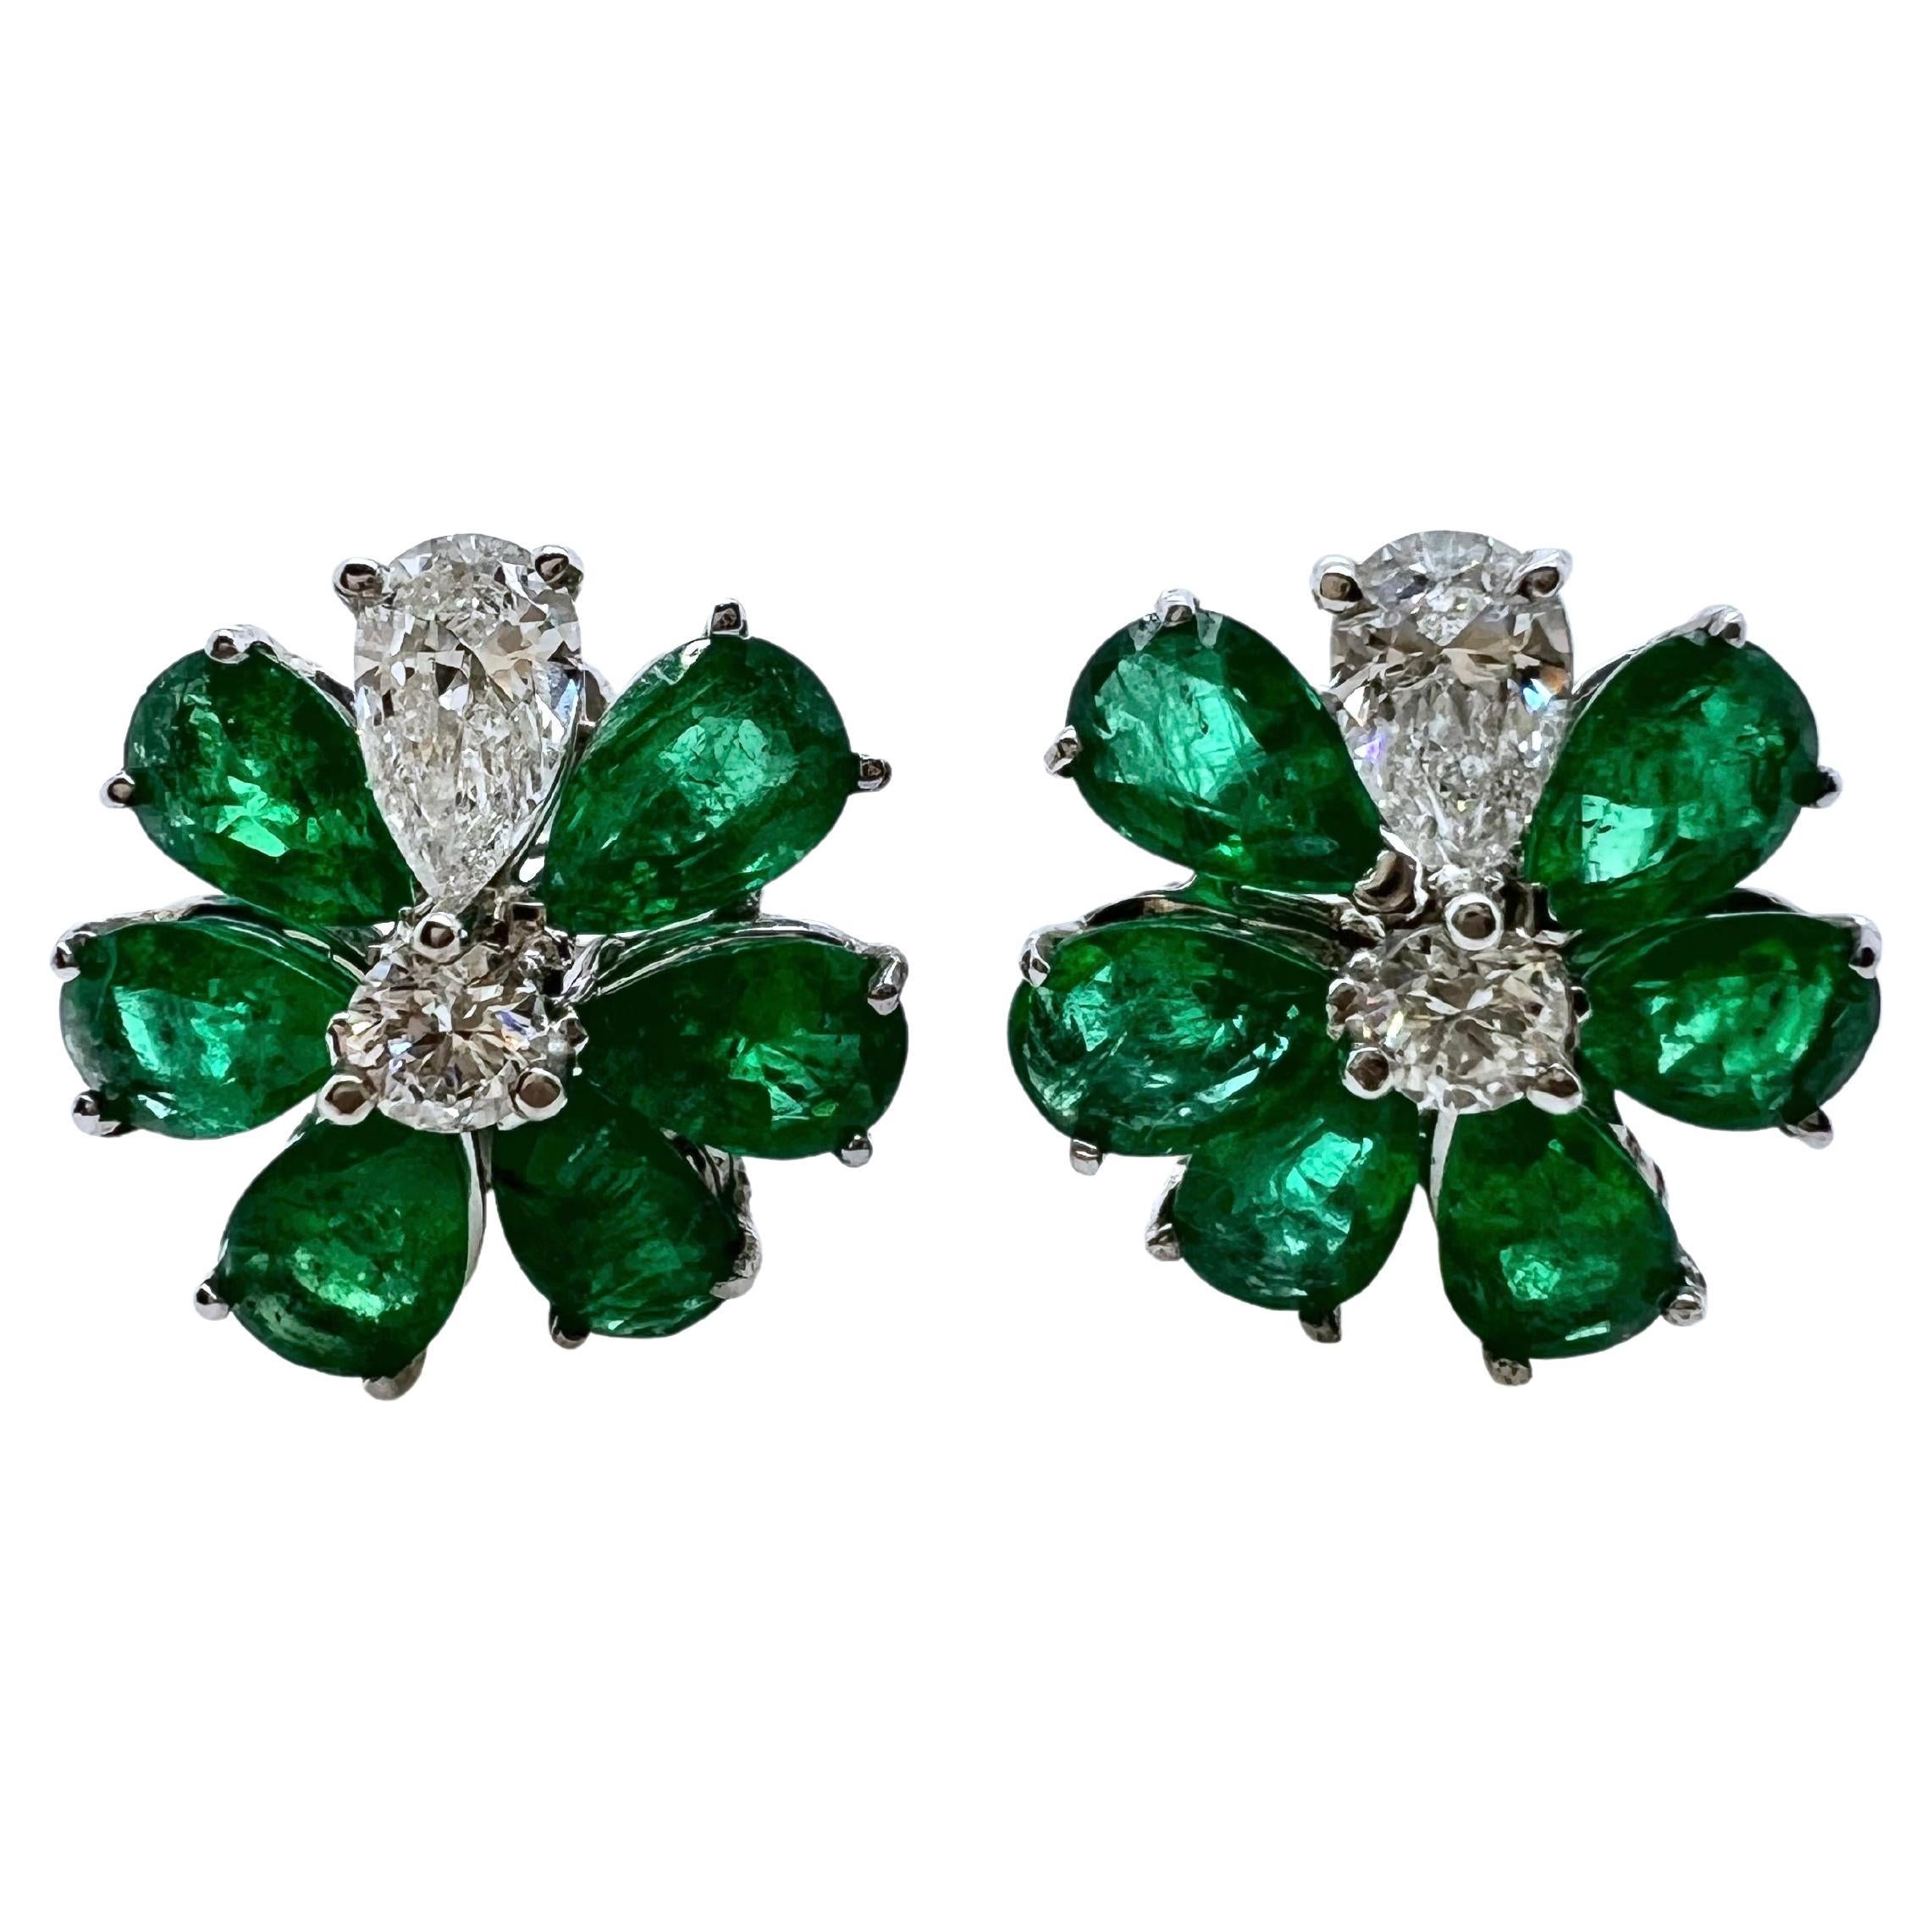 14k White Gold Pear Shaped Emeralds Earrings with Diamonds